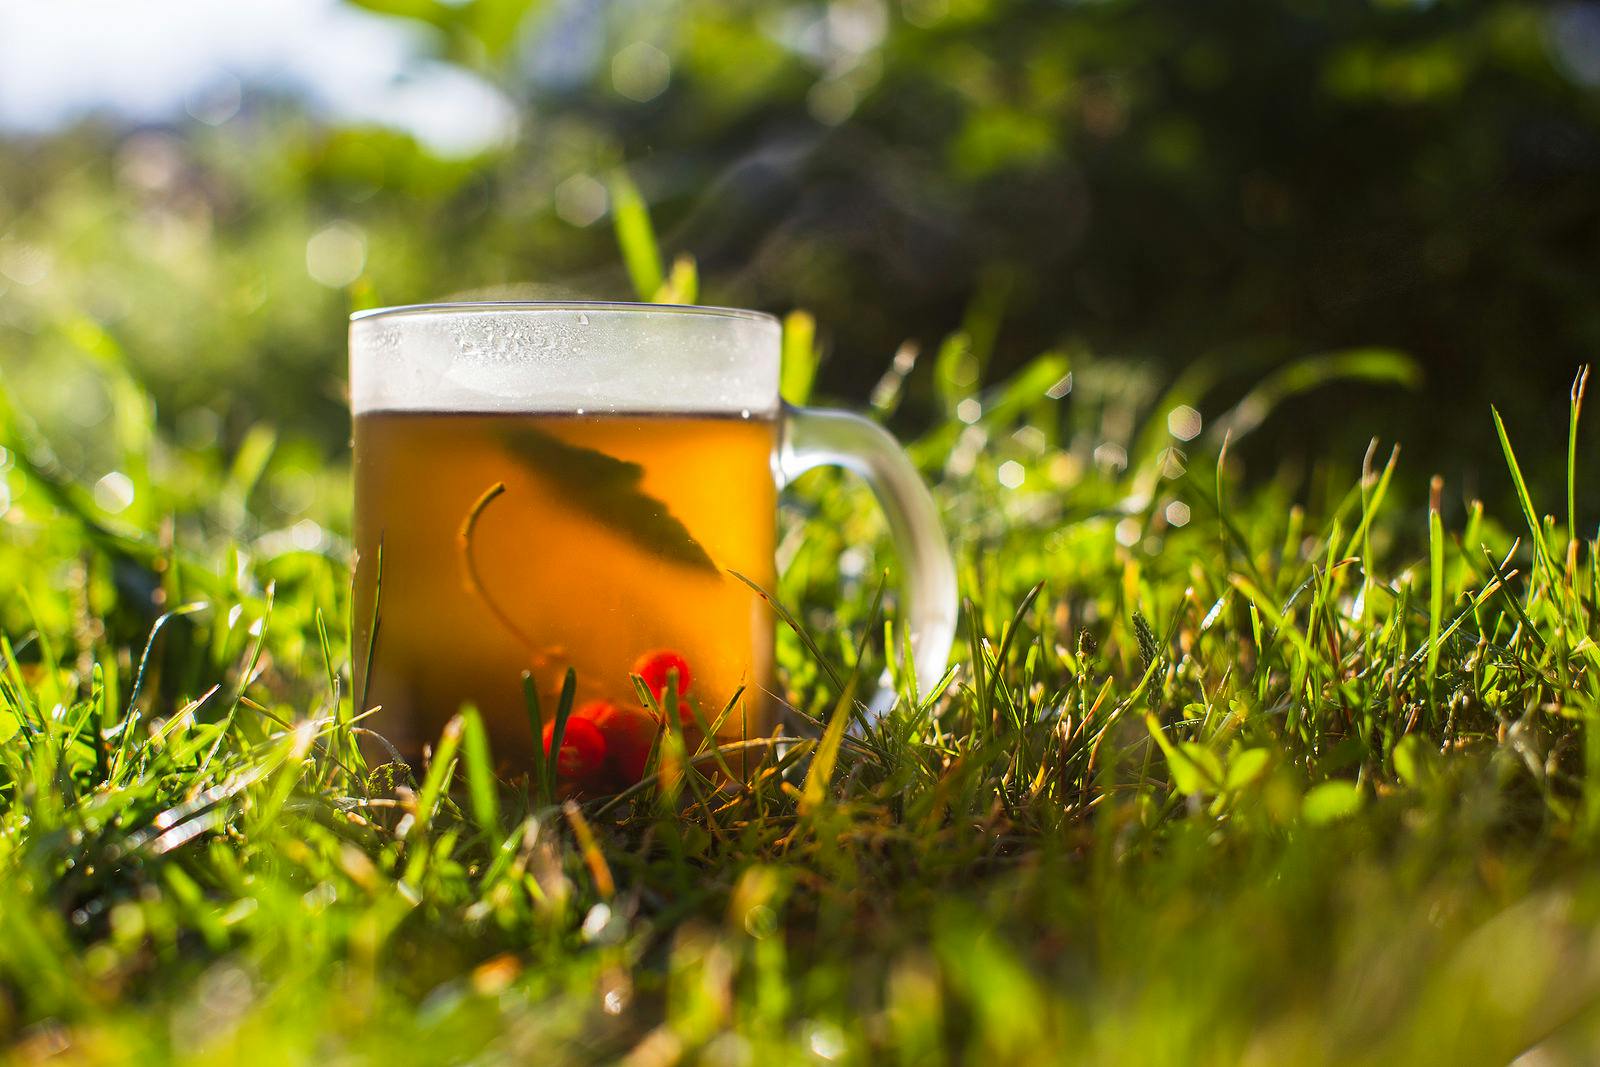 Glass mug with tea in grass contains berries rich in flavanols